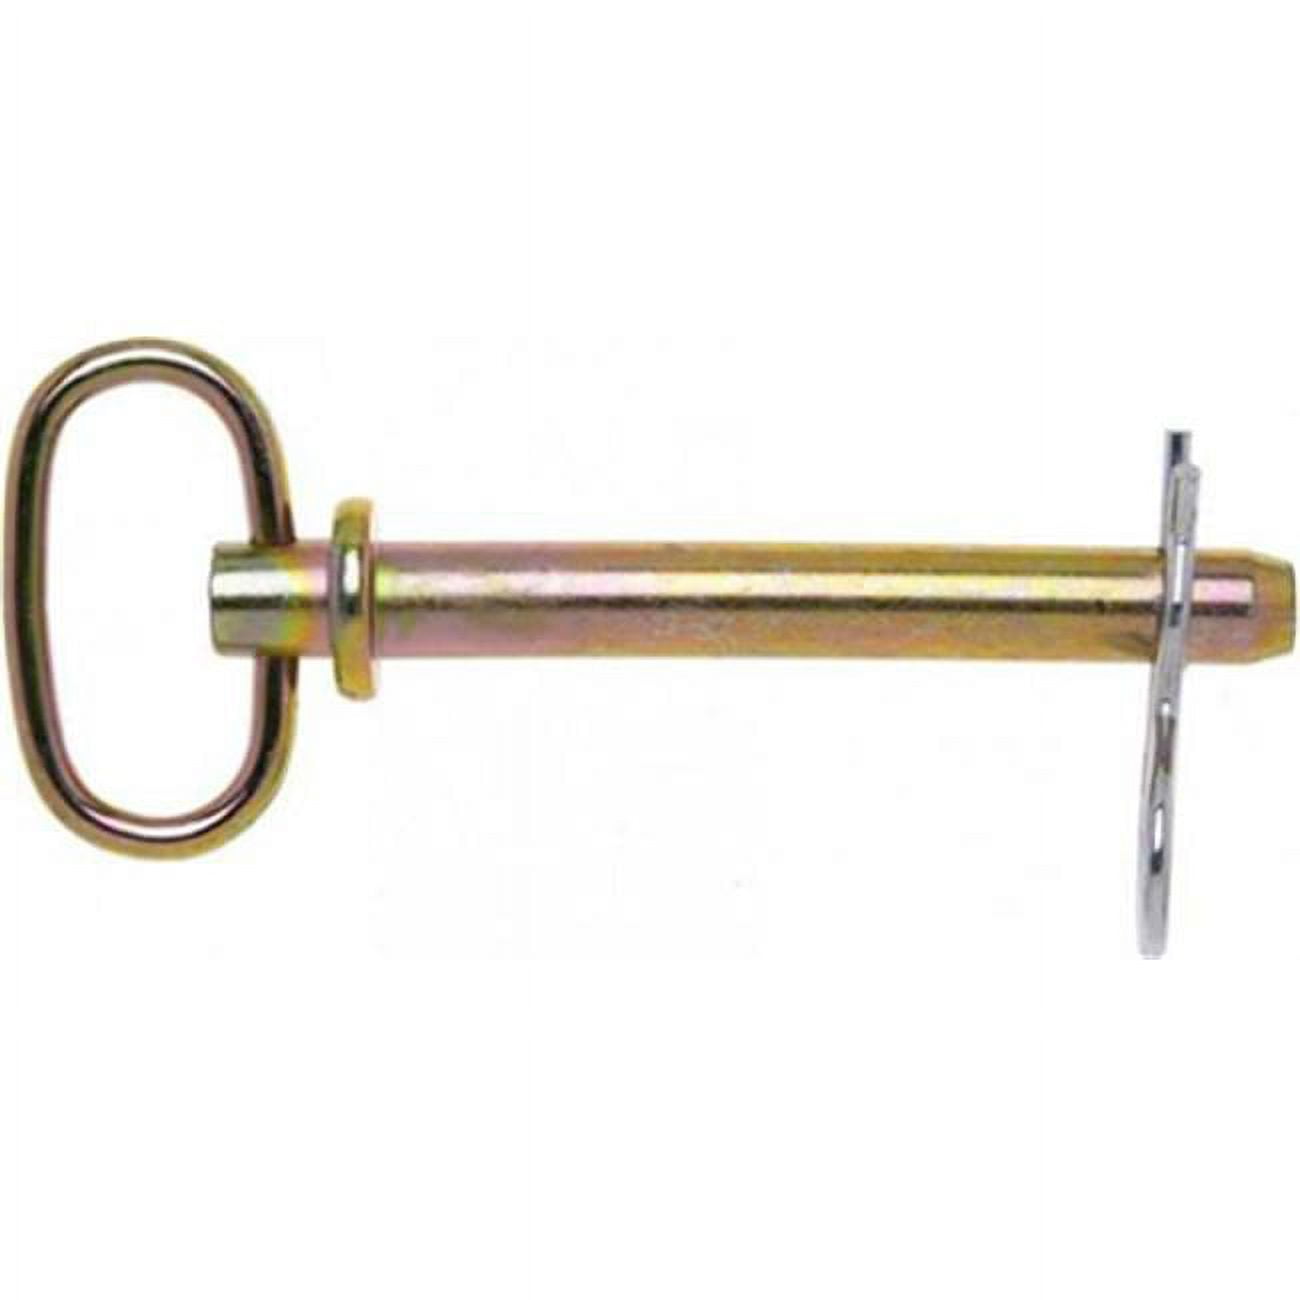 B3899818 0.13 In. Campbell Hitch Pin With Clip, Yellow Zinc Plated - 10 Per Bag